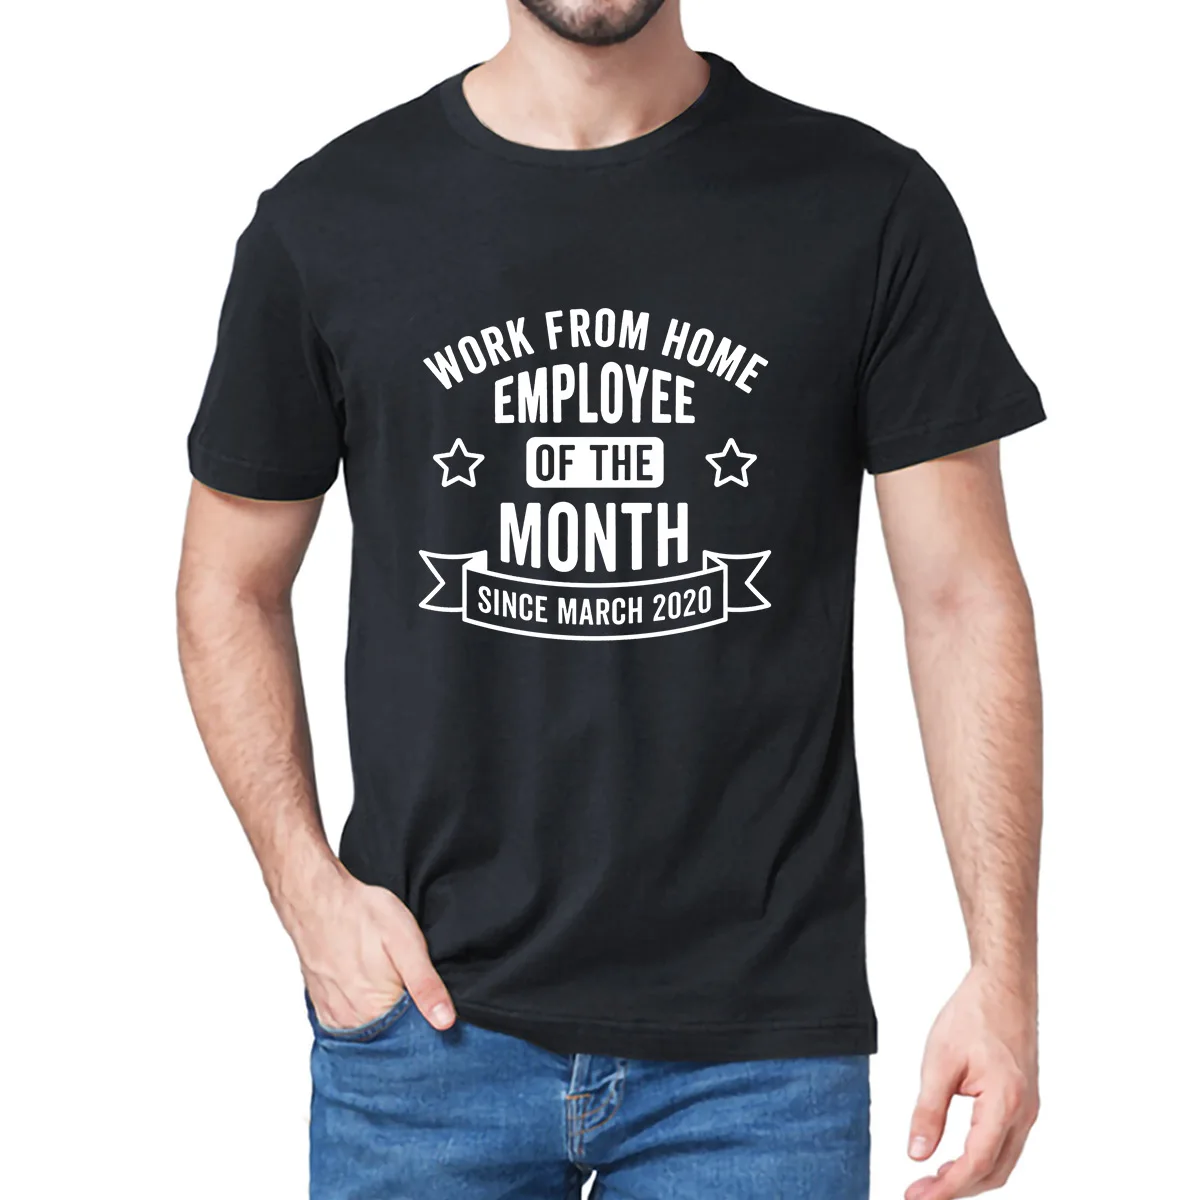 

Unisex Work From Home Employee of the Month Since March 2020 Men's 100% Cotton Short Sleeve T-Shirt Streetwear Funny Tee